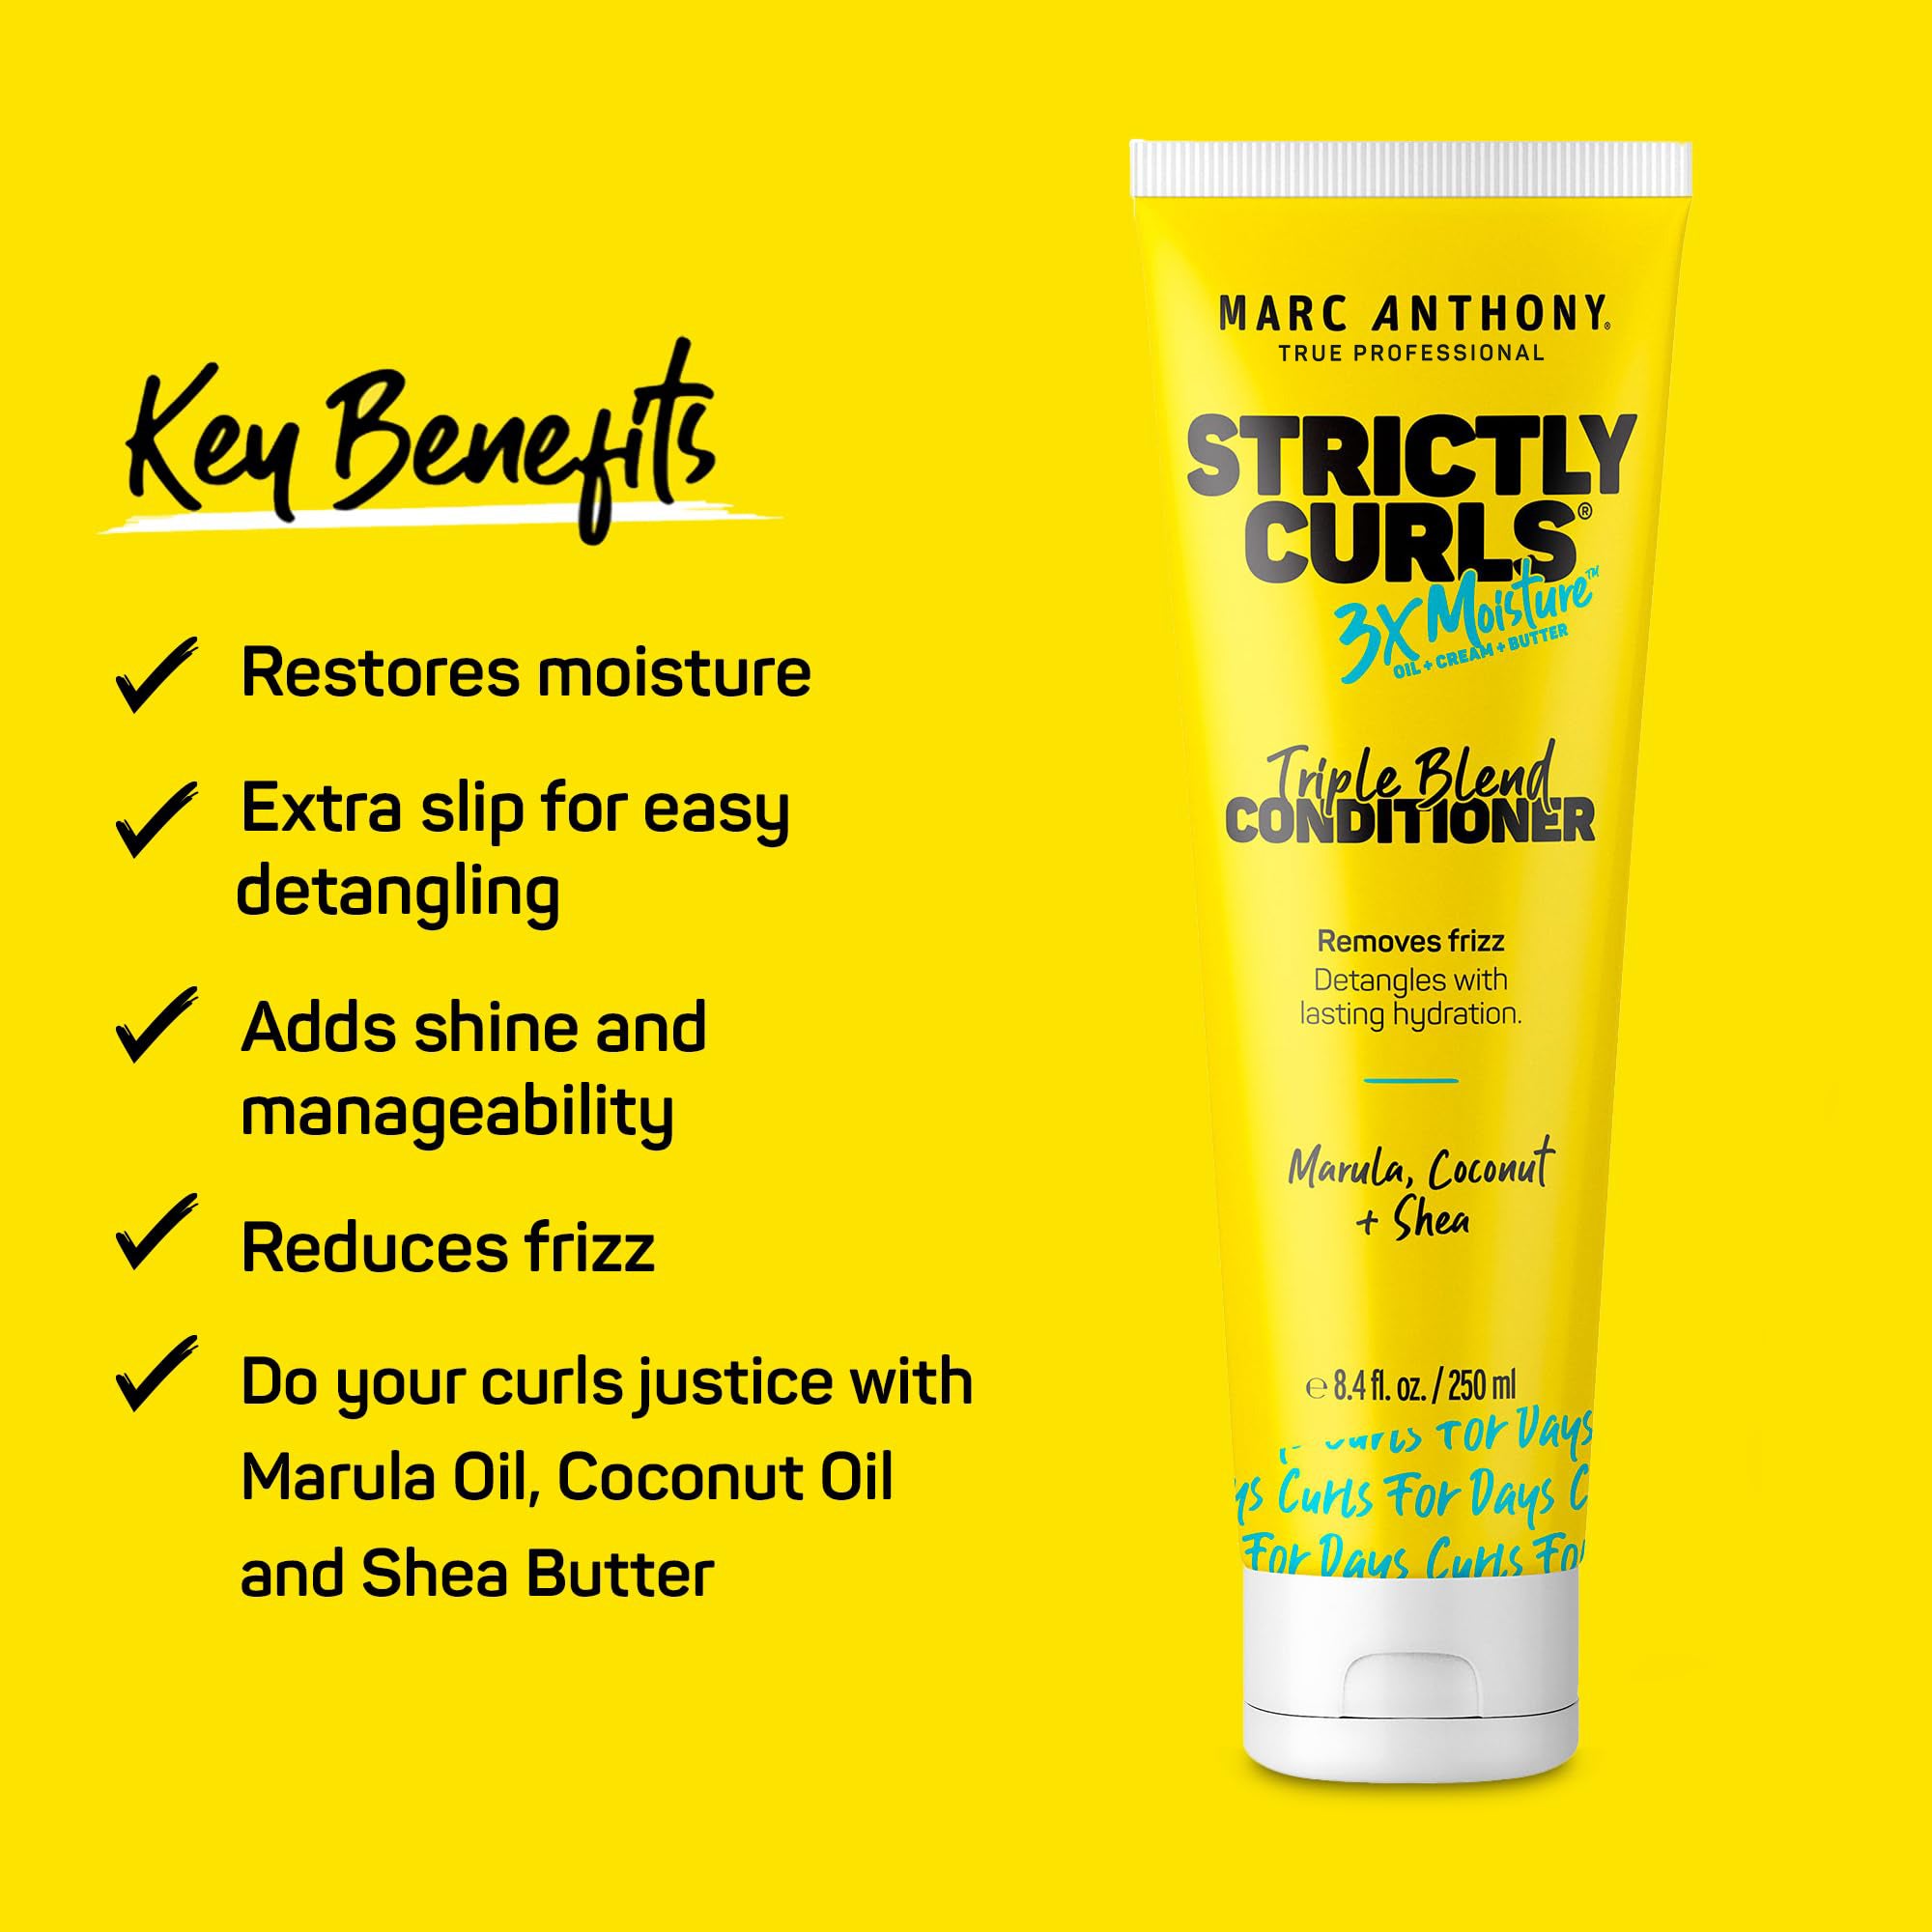 Strictly Curls® 3X Moisture <br> Triple Blend Conditioner